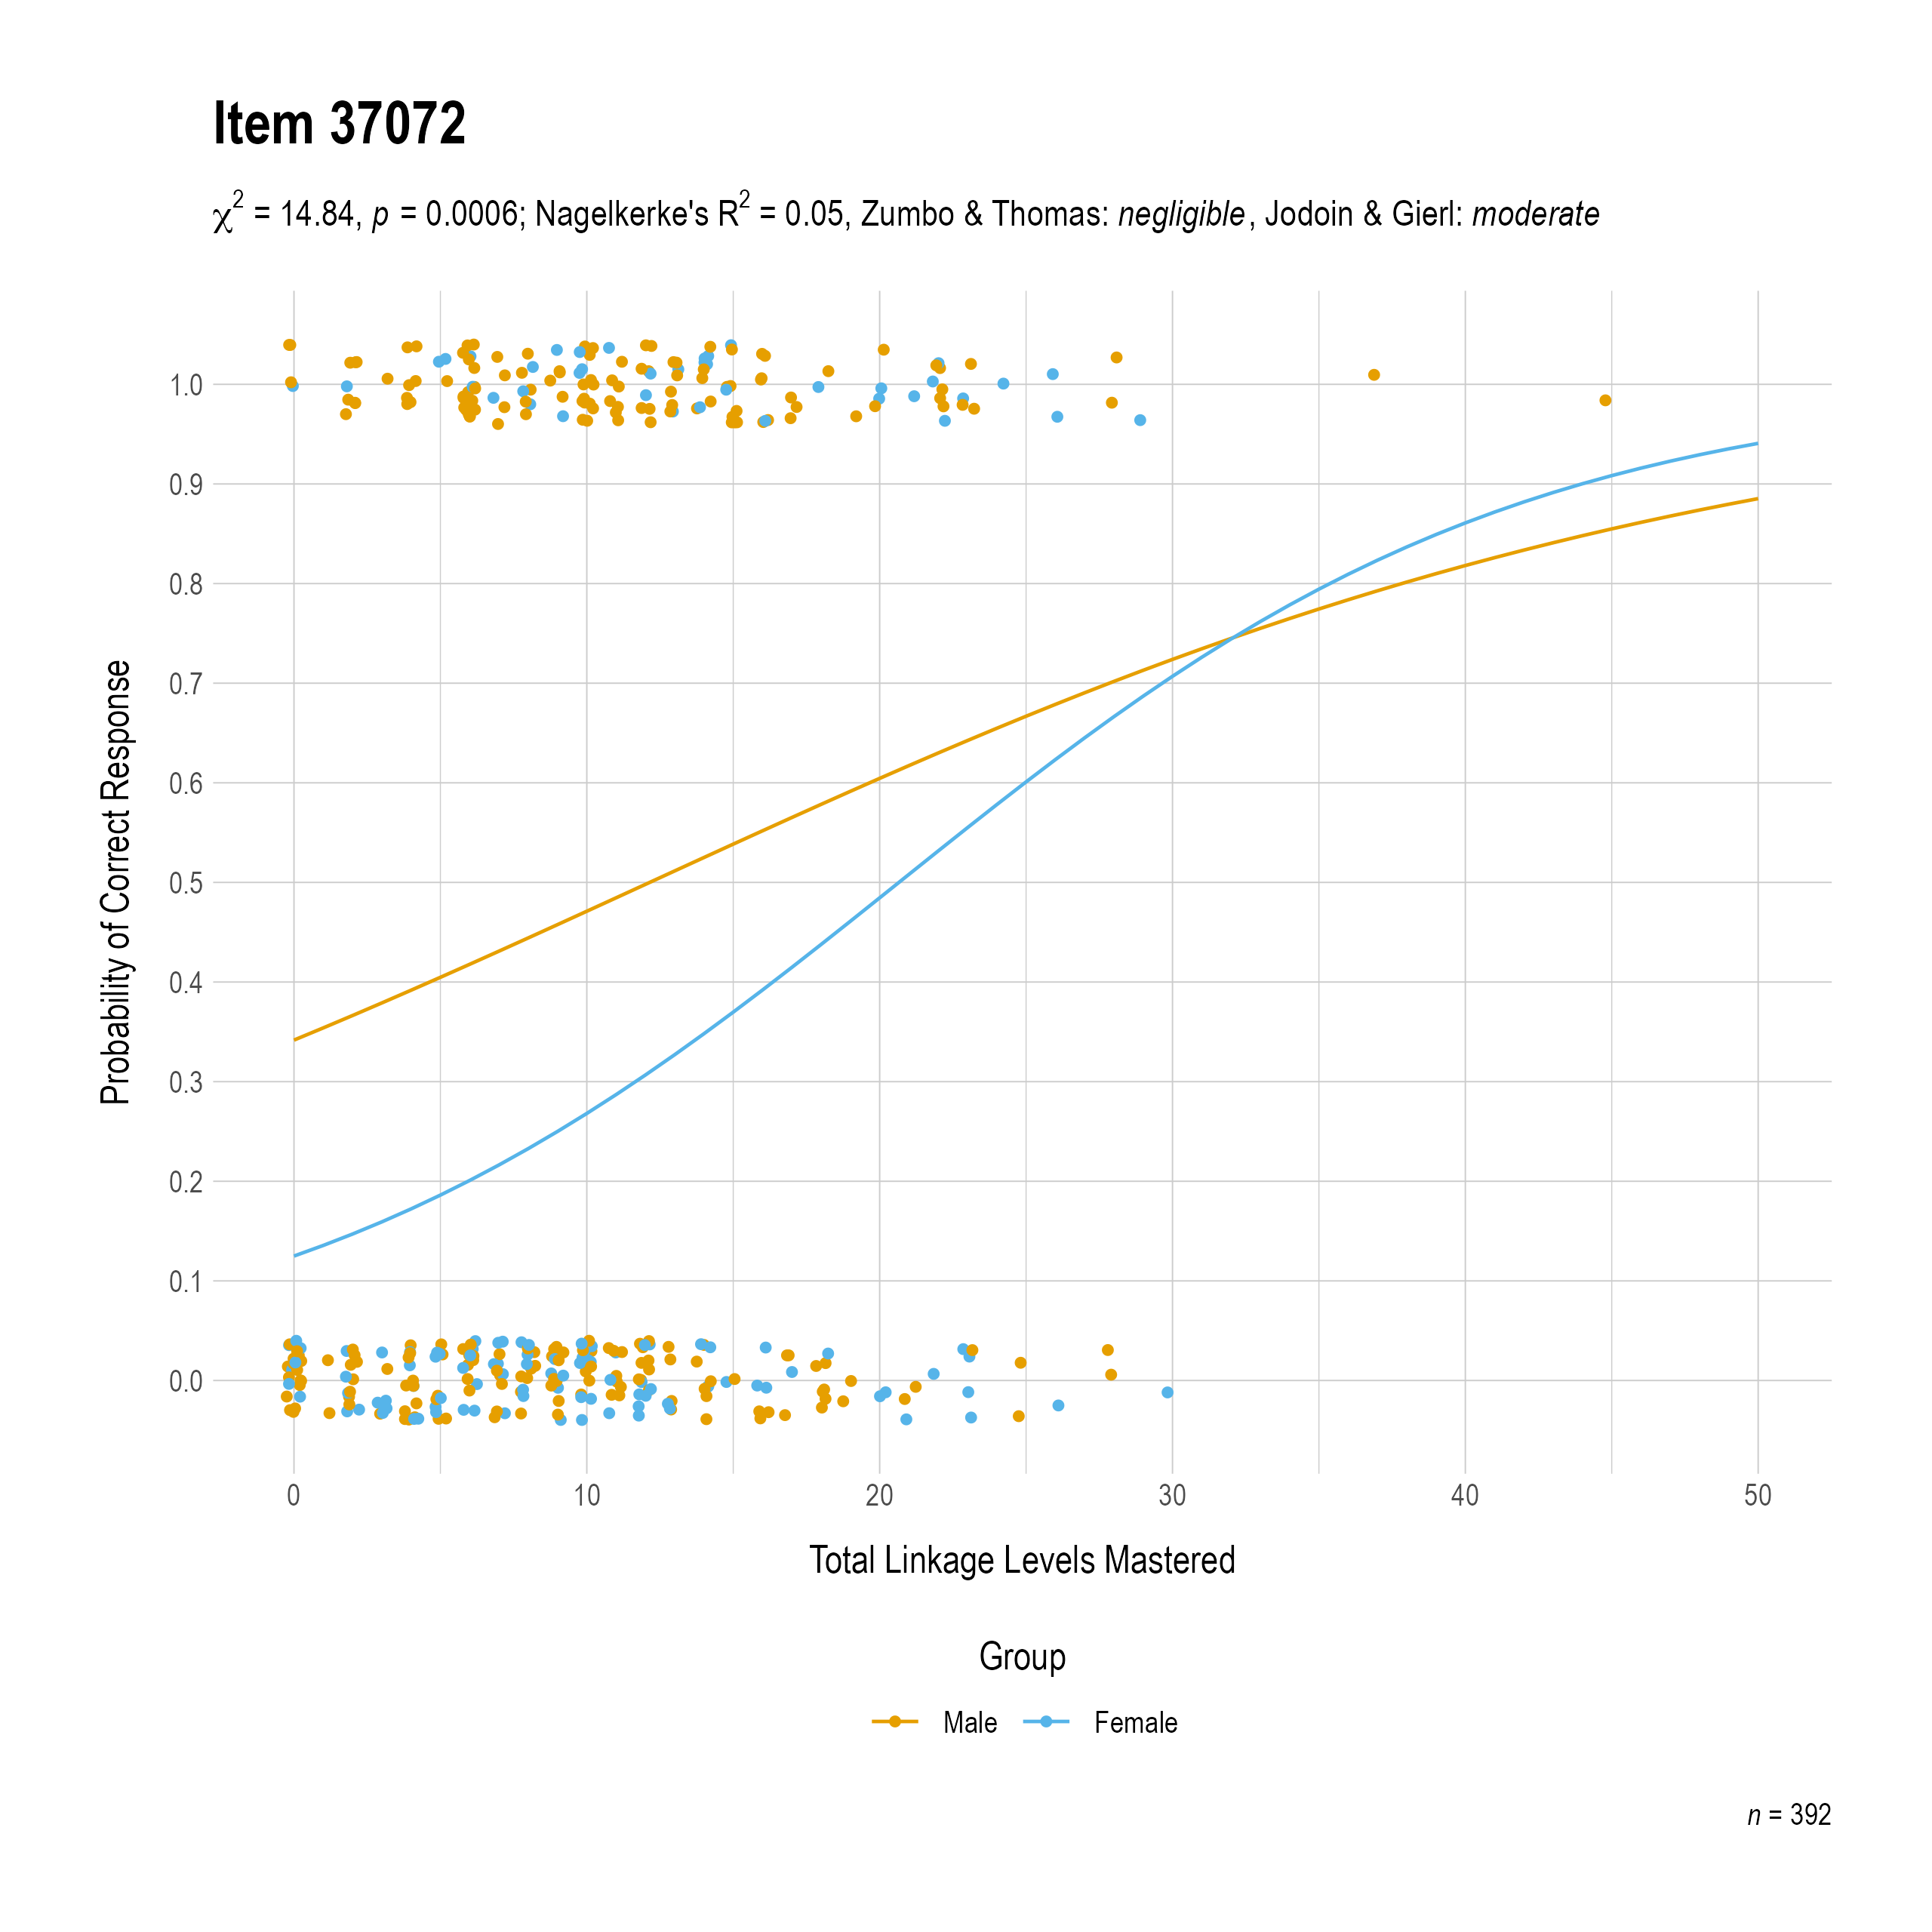 The plot of the combined gender differential item function evidence for Mathematics item 37072. The figure contains points shaded by group. The figure also contains a logistic regression curve for each group. The total linkage levels mastered in is on the x-axis, and the probability of a correct response is on the y-axis.